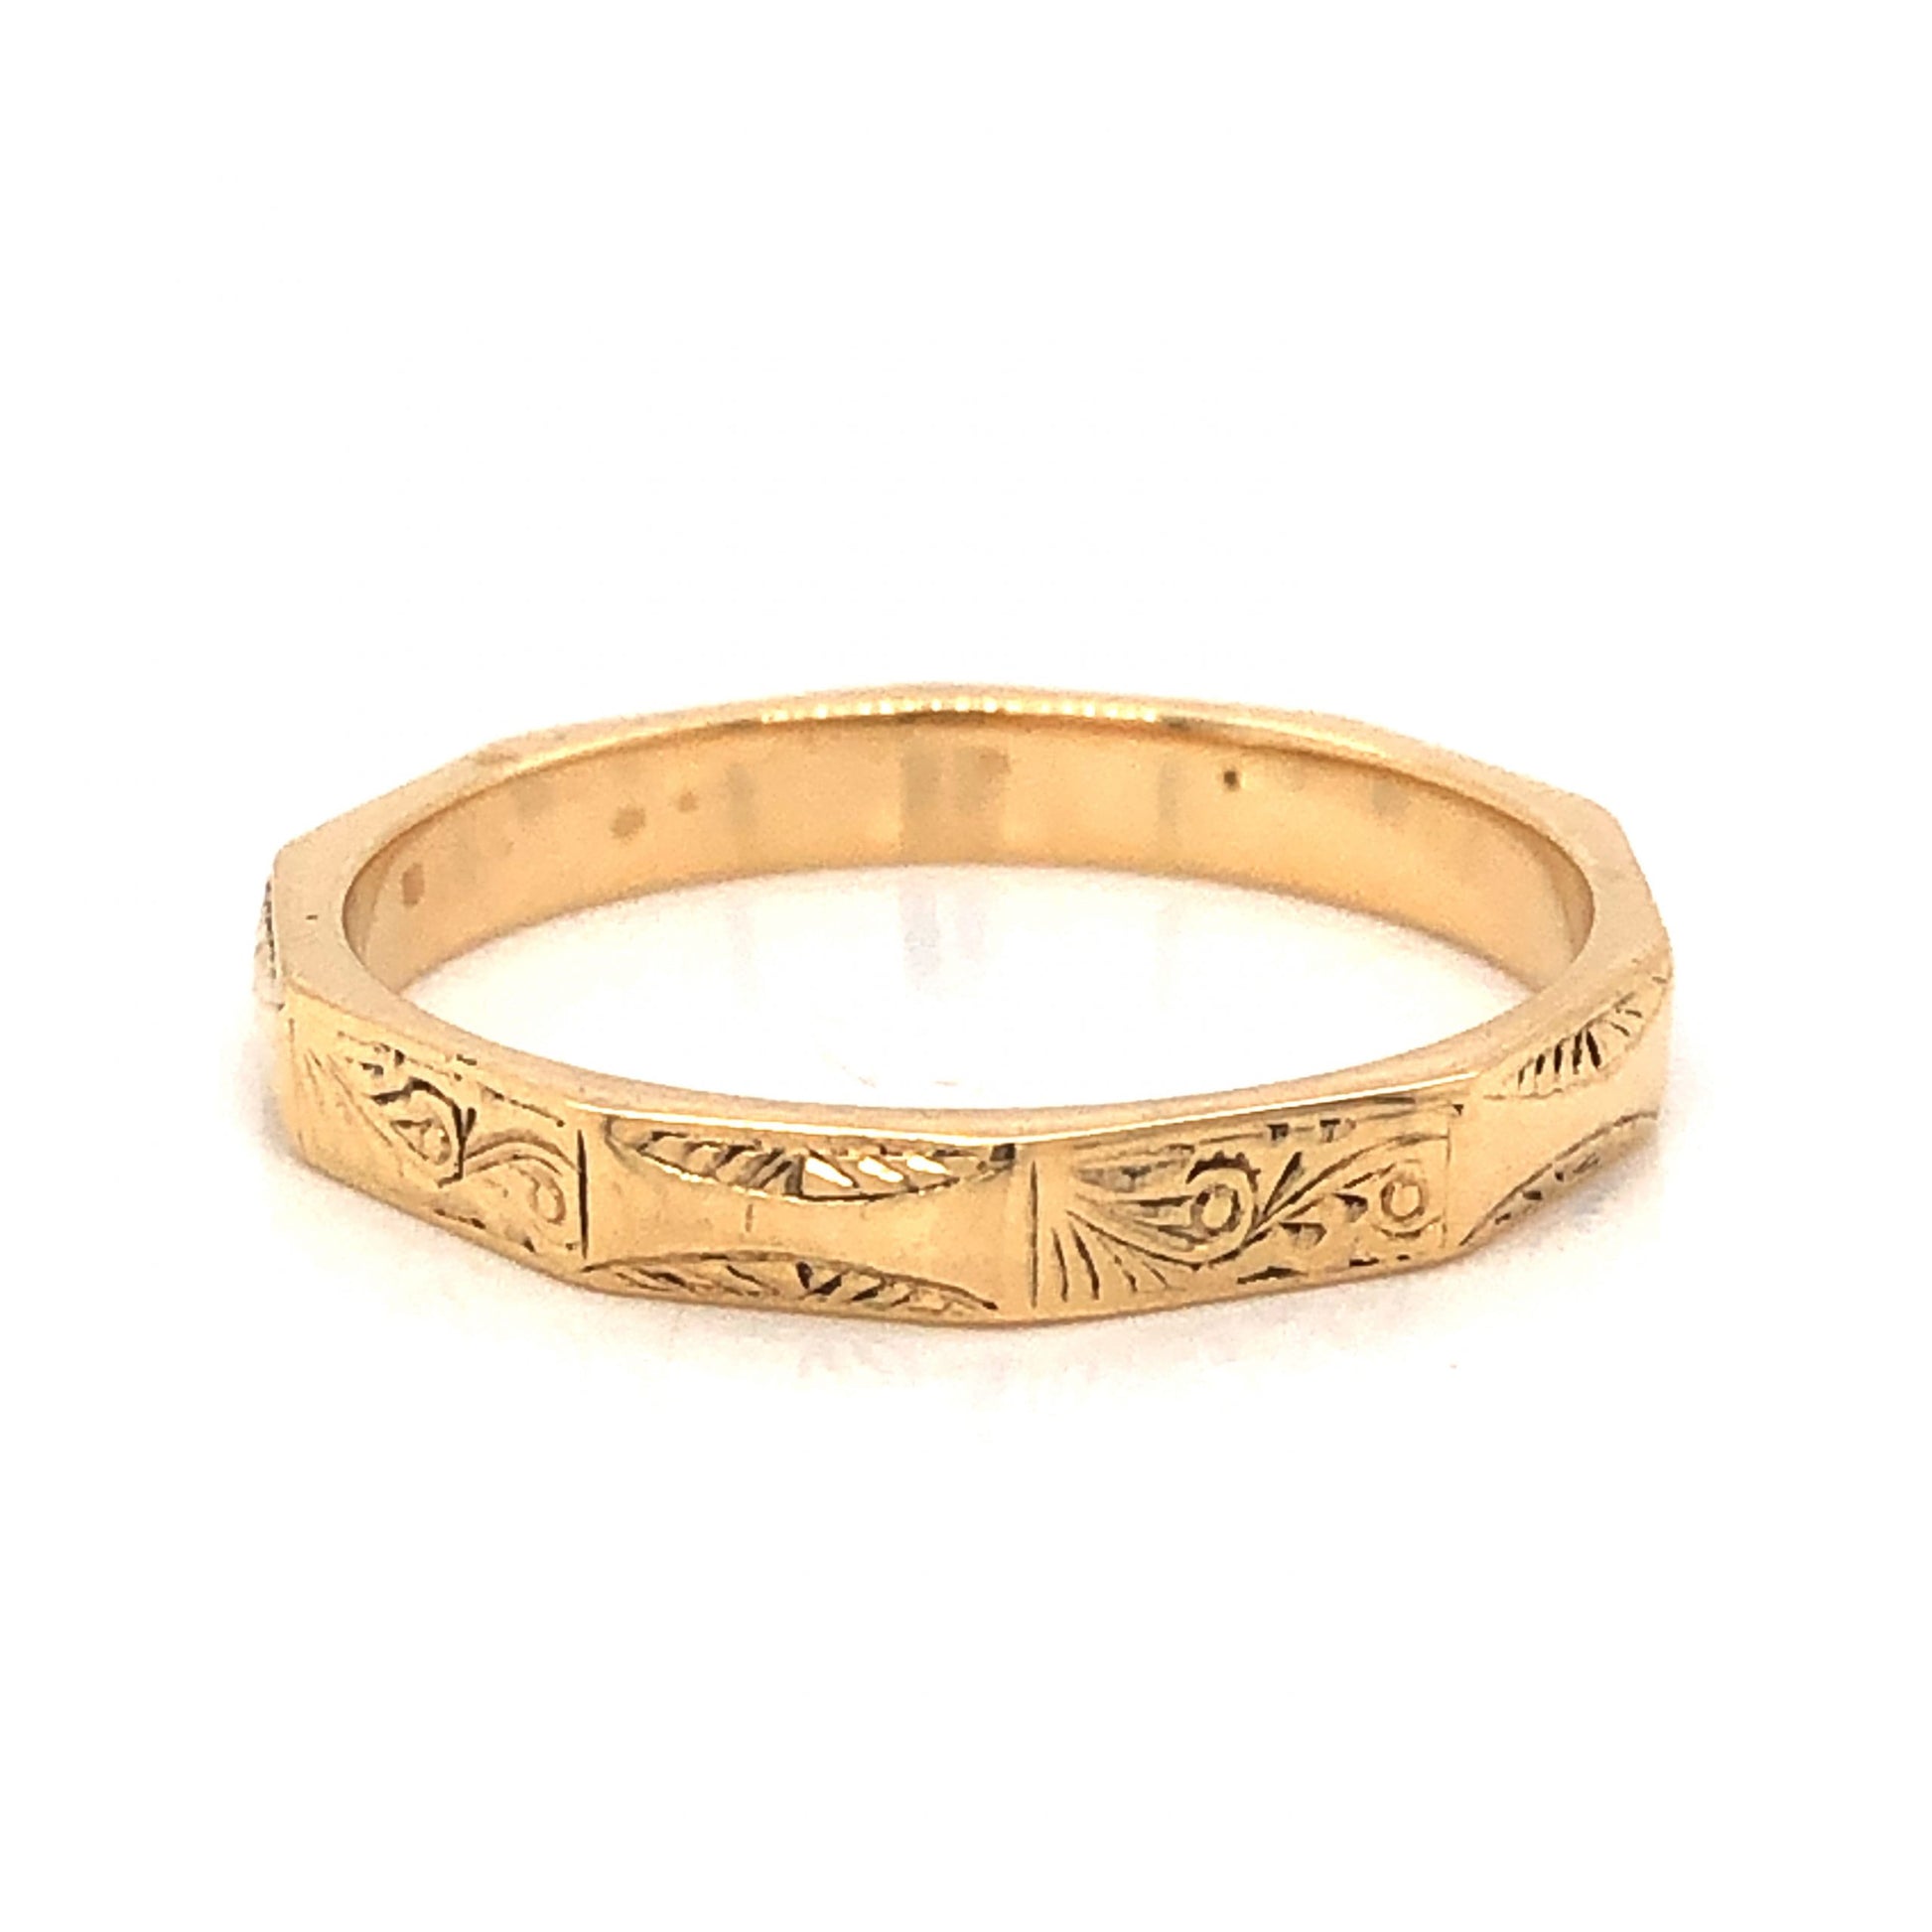 Victorian Engraved Wedding Band in 18k Yellow GoldComposition: 18 Karat Yellow Gold Ring Size: 7.25 Total Gram Weight: 2.9 g Inscription: Stamped English hallmarks, 18
      